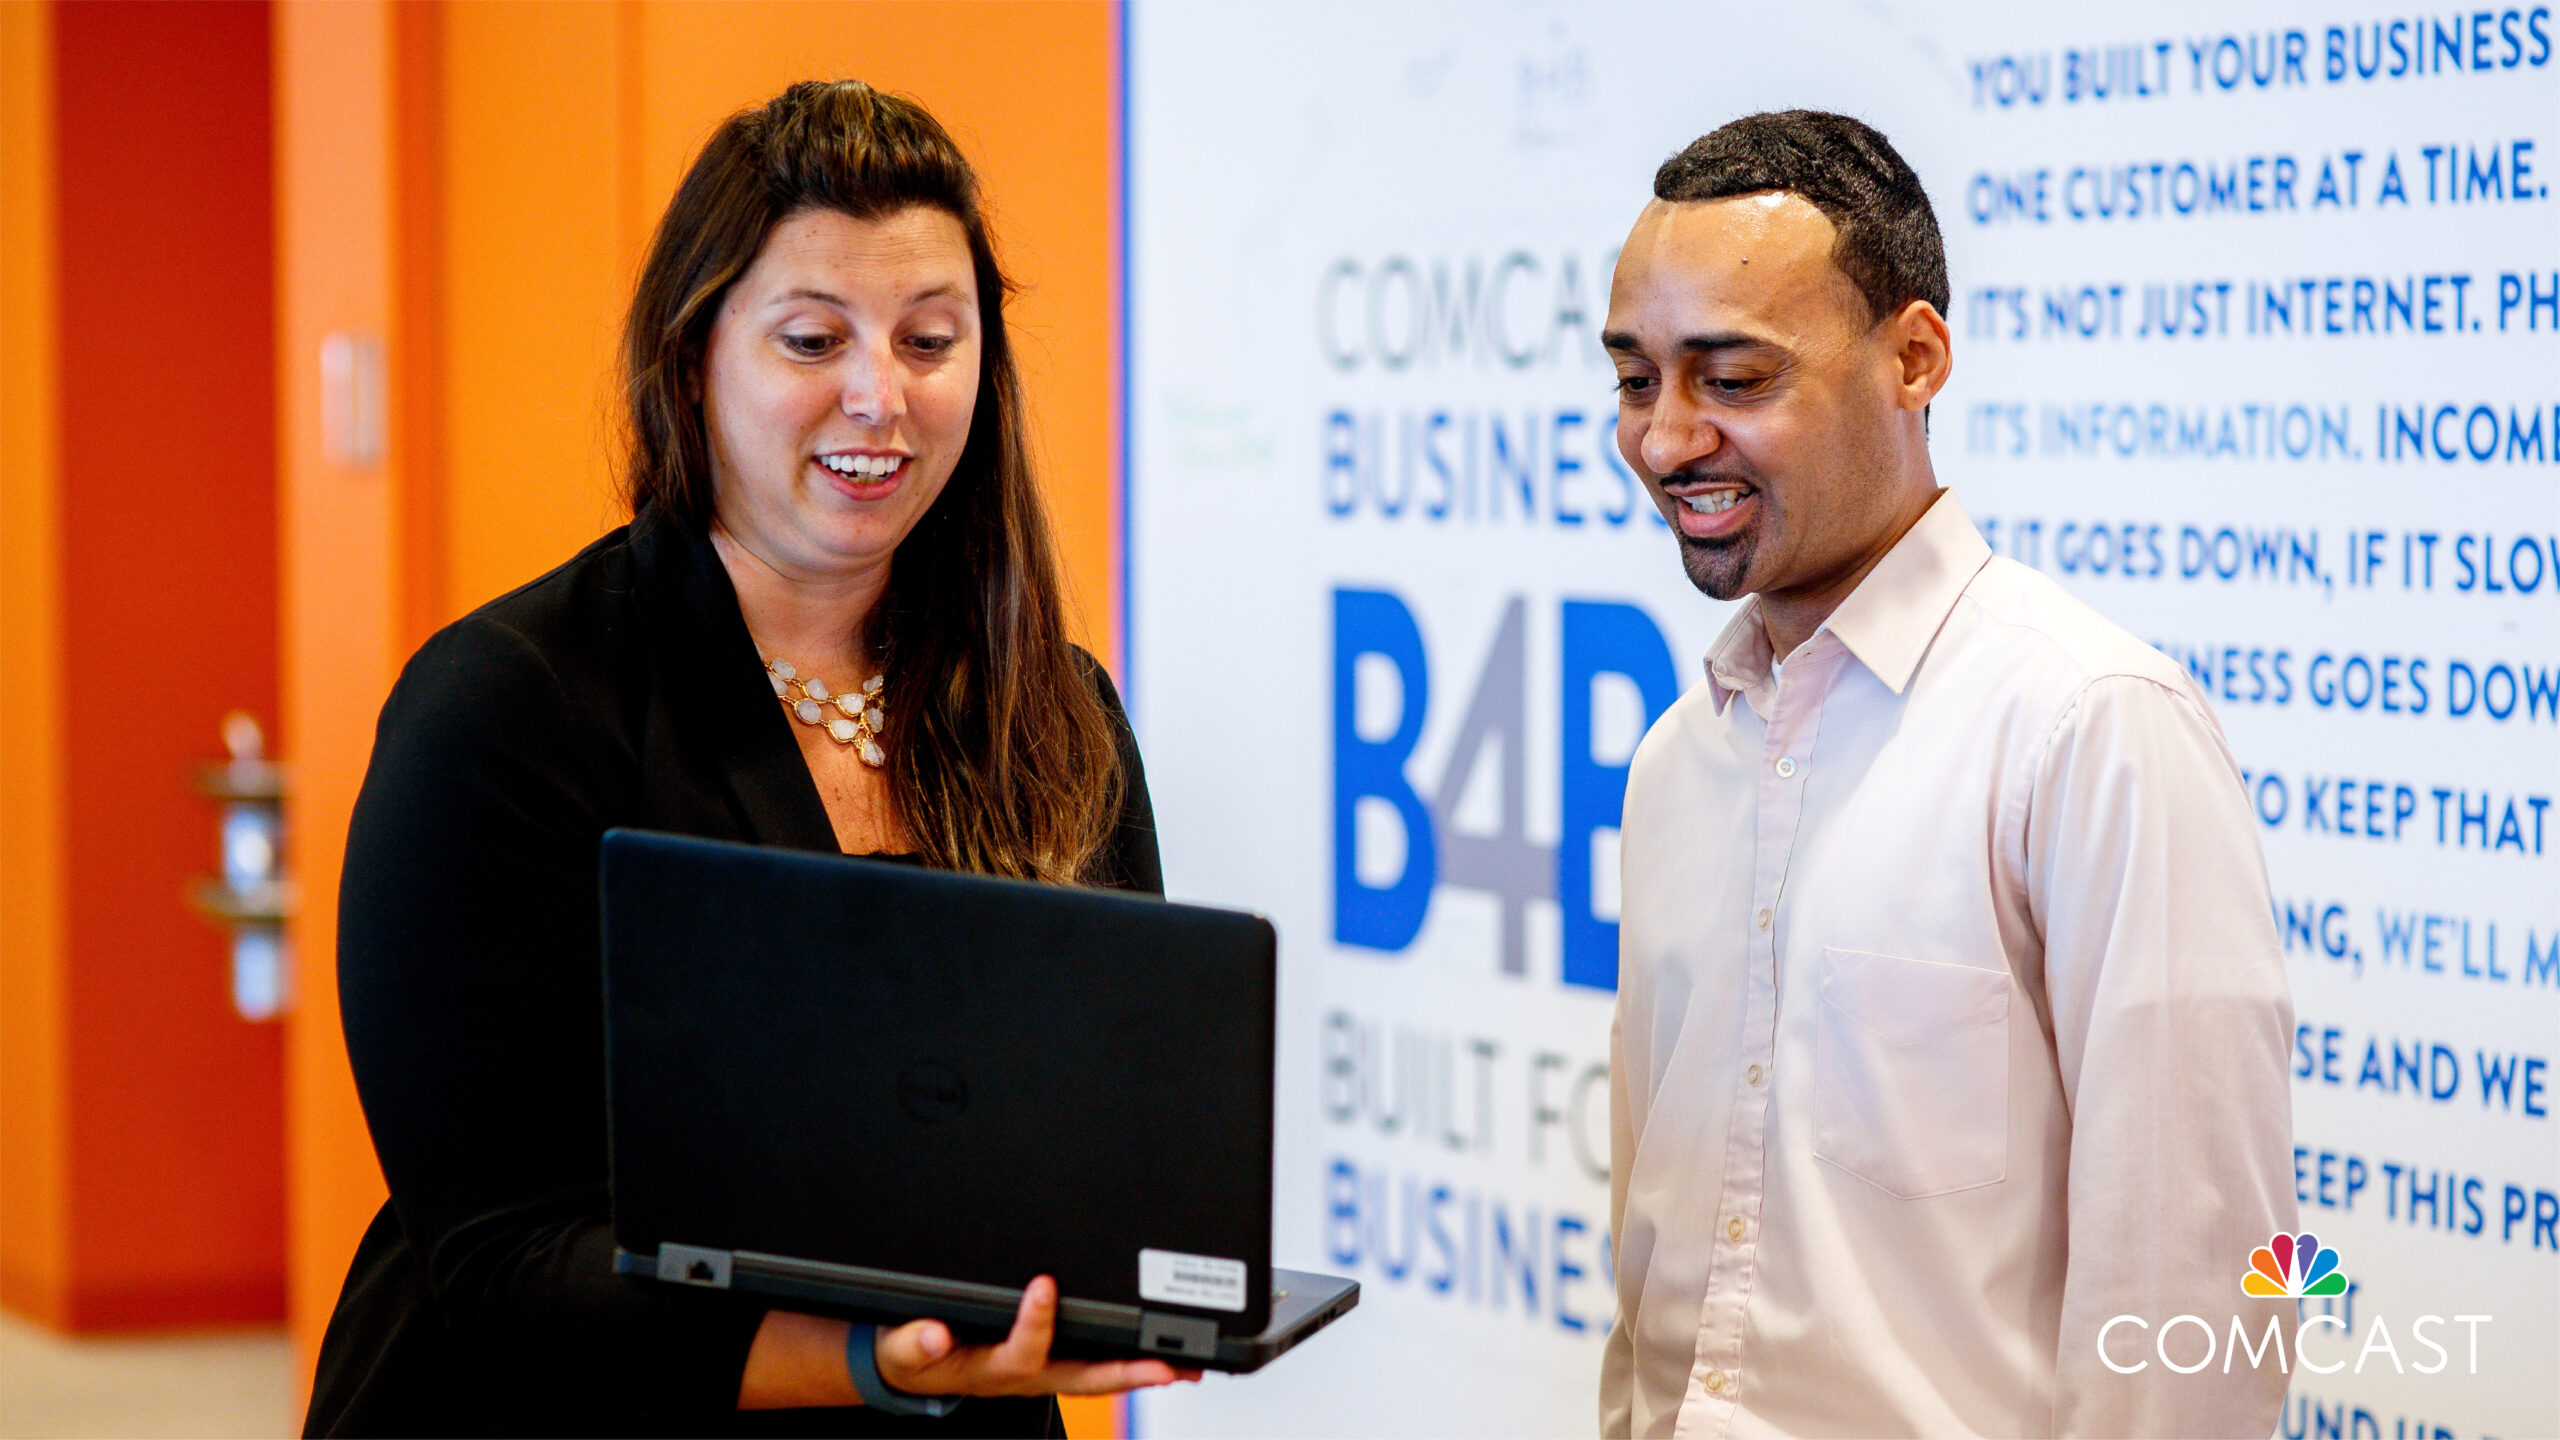 Woman with laptop speaking to man with Comcast Business logo in background